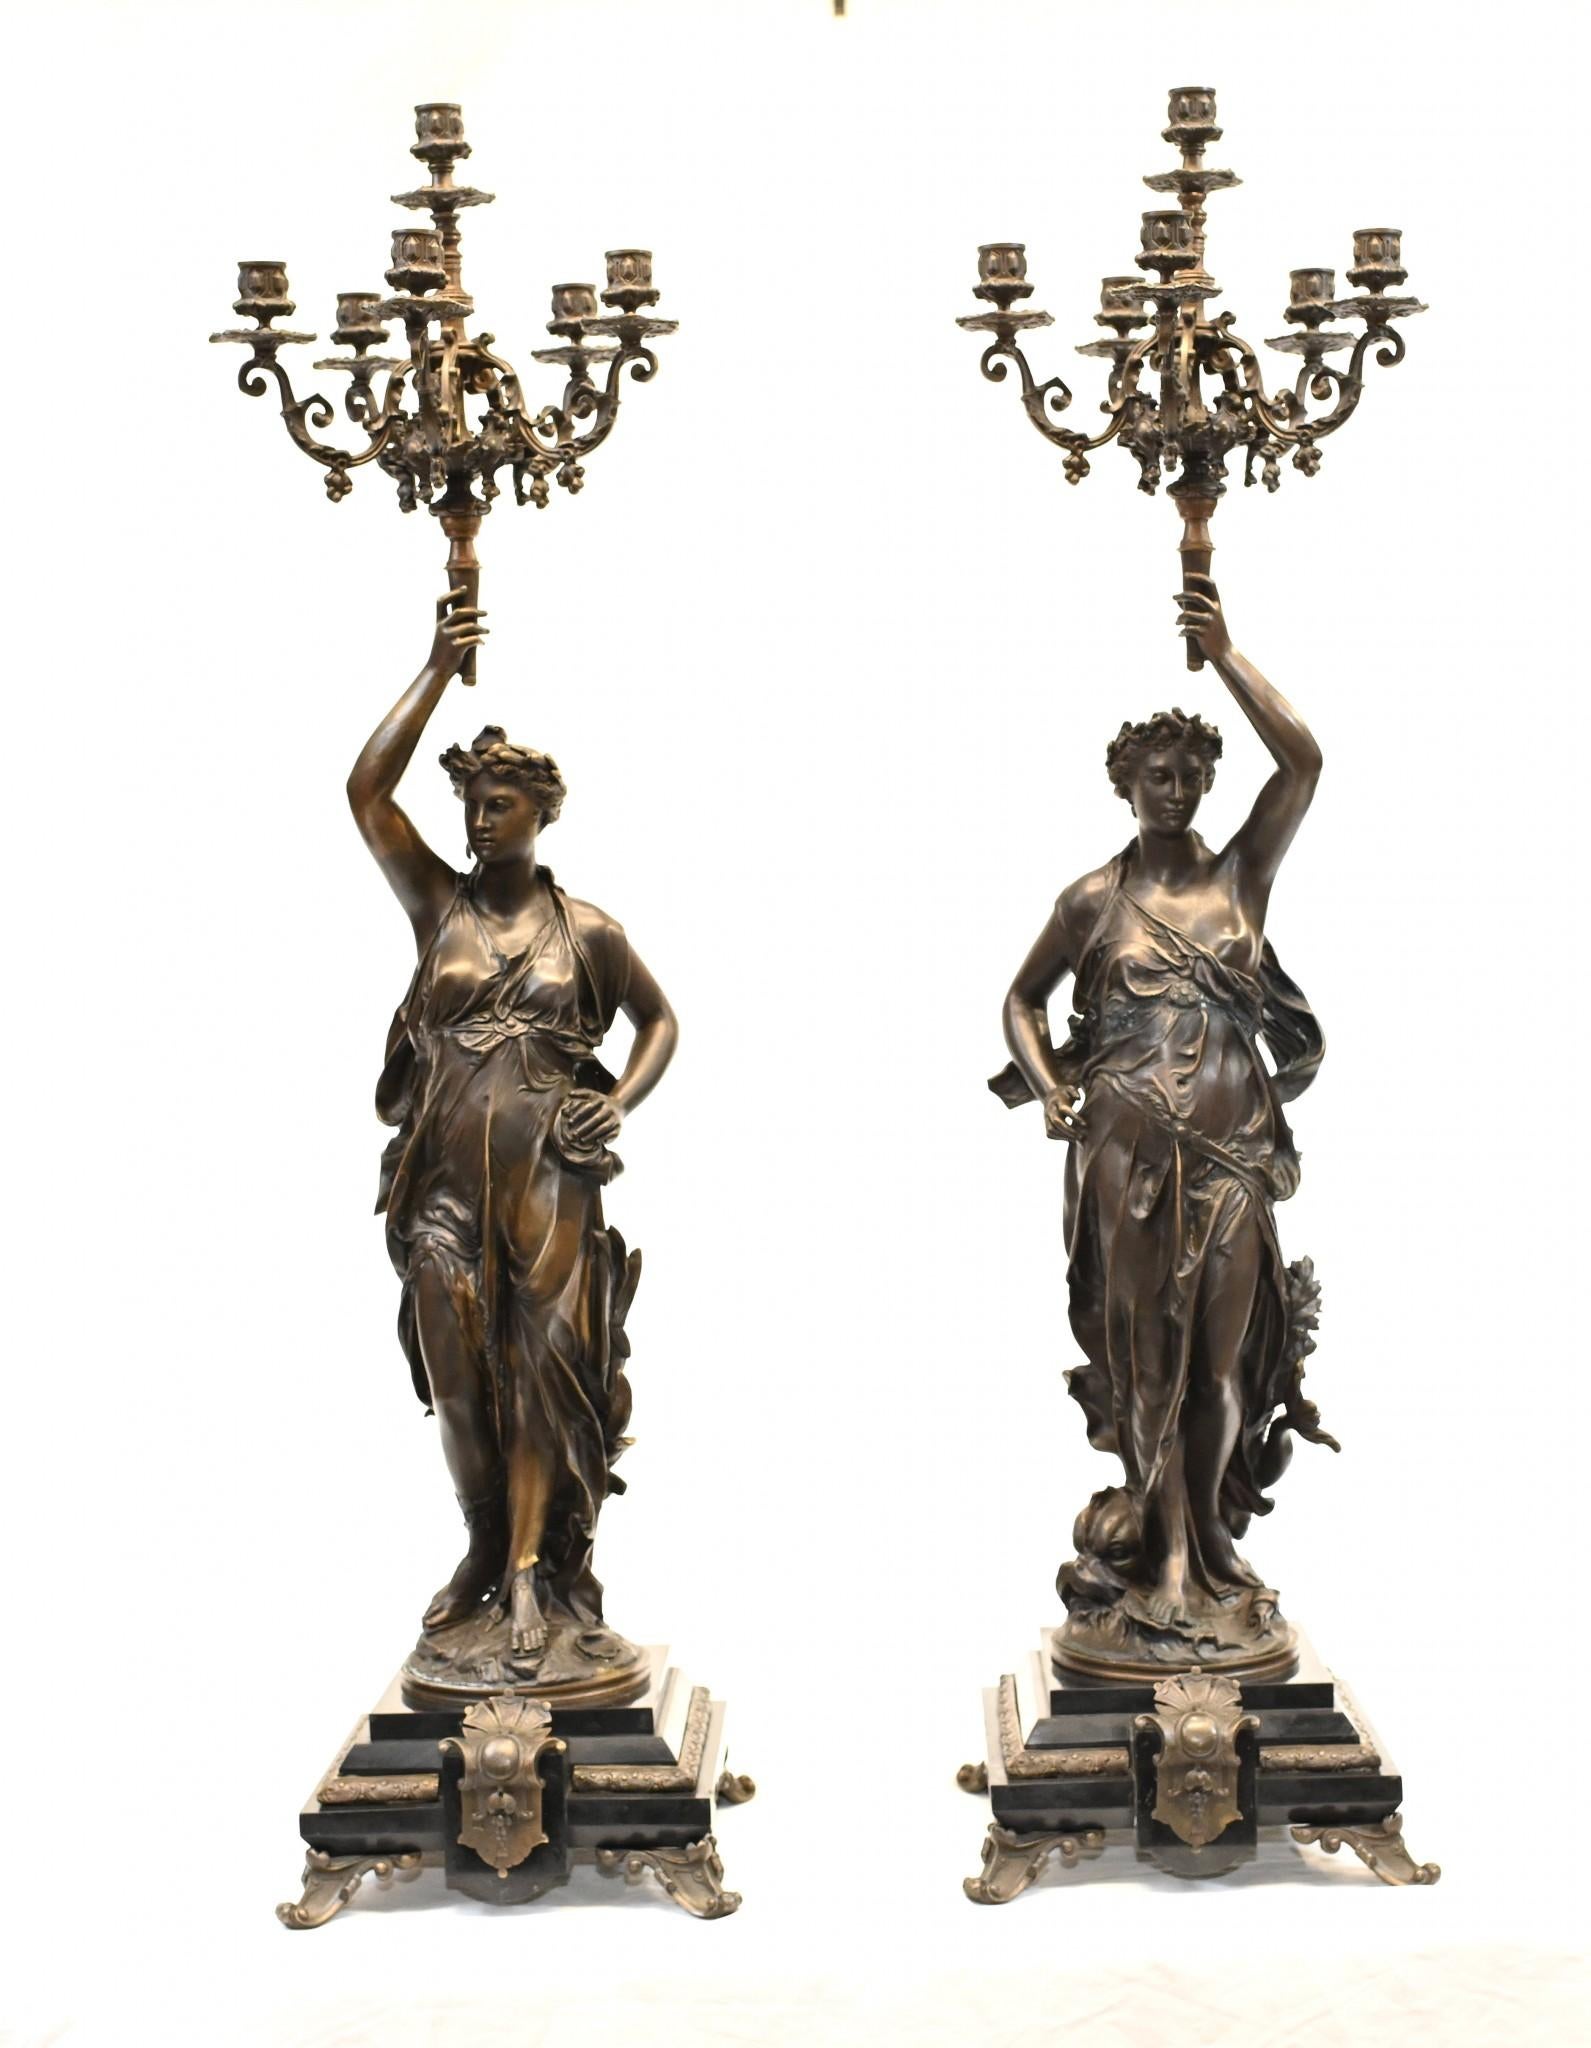 Absolutely stunning pair of French Bronze candelabras by Gregoire
Each figurine holds aloft the five branch candelbras
Casting is superb and and the patina to the bronze is wonderful
Each stand in at over three feet tall - so an impressive